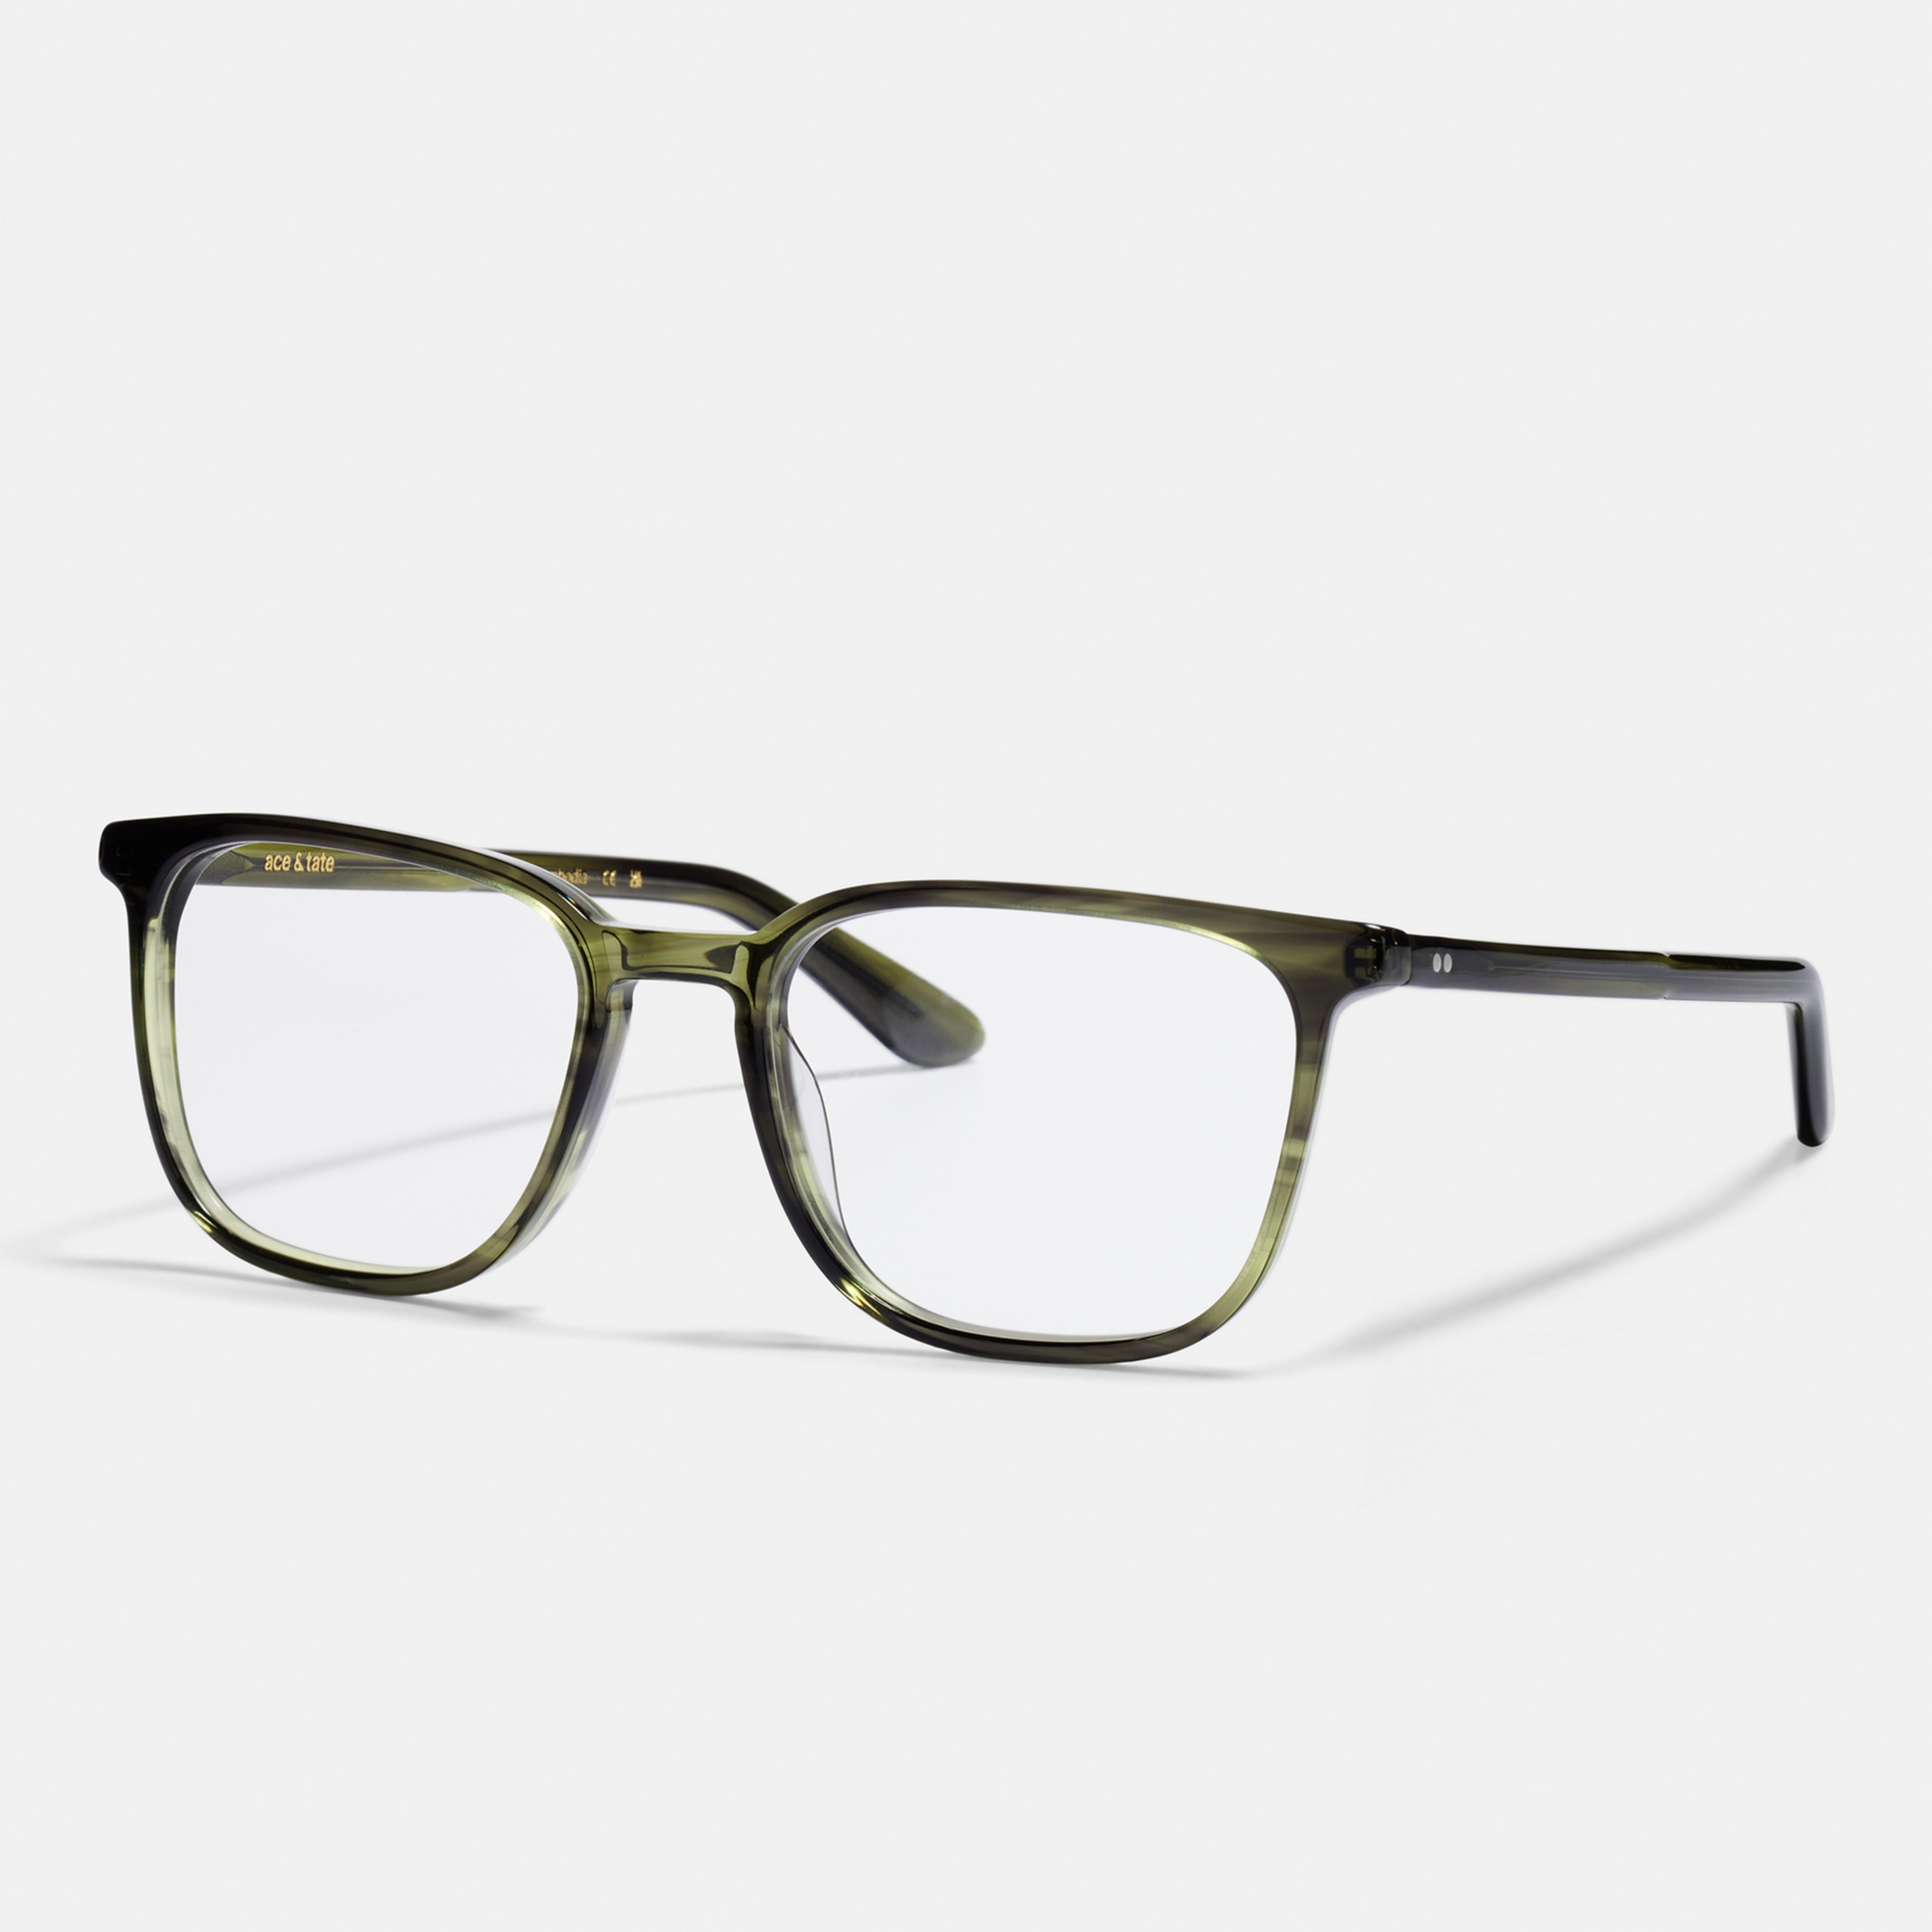 Ace & Tate Glasses | rectangle Acetate in Green